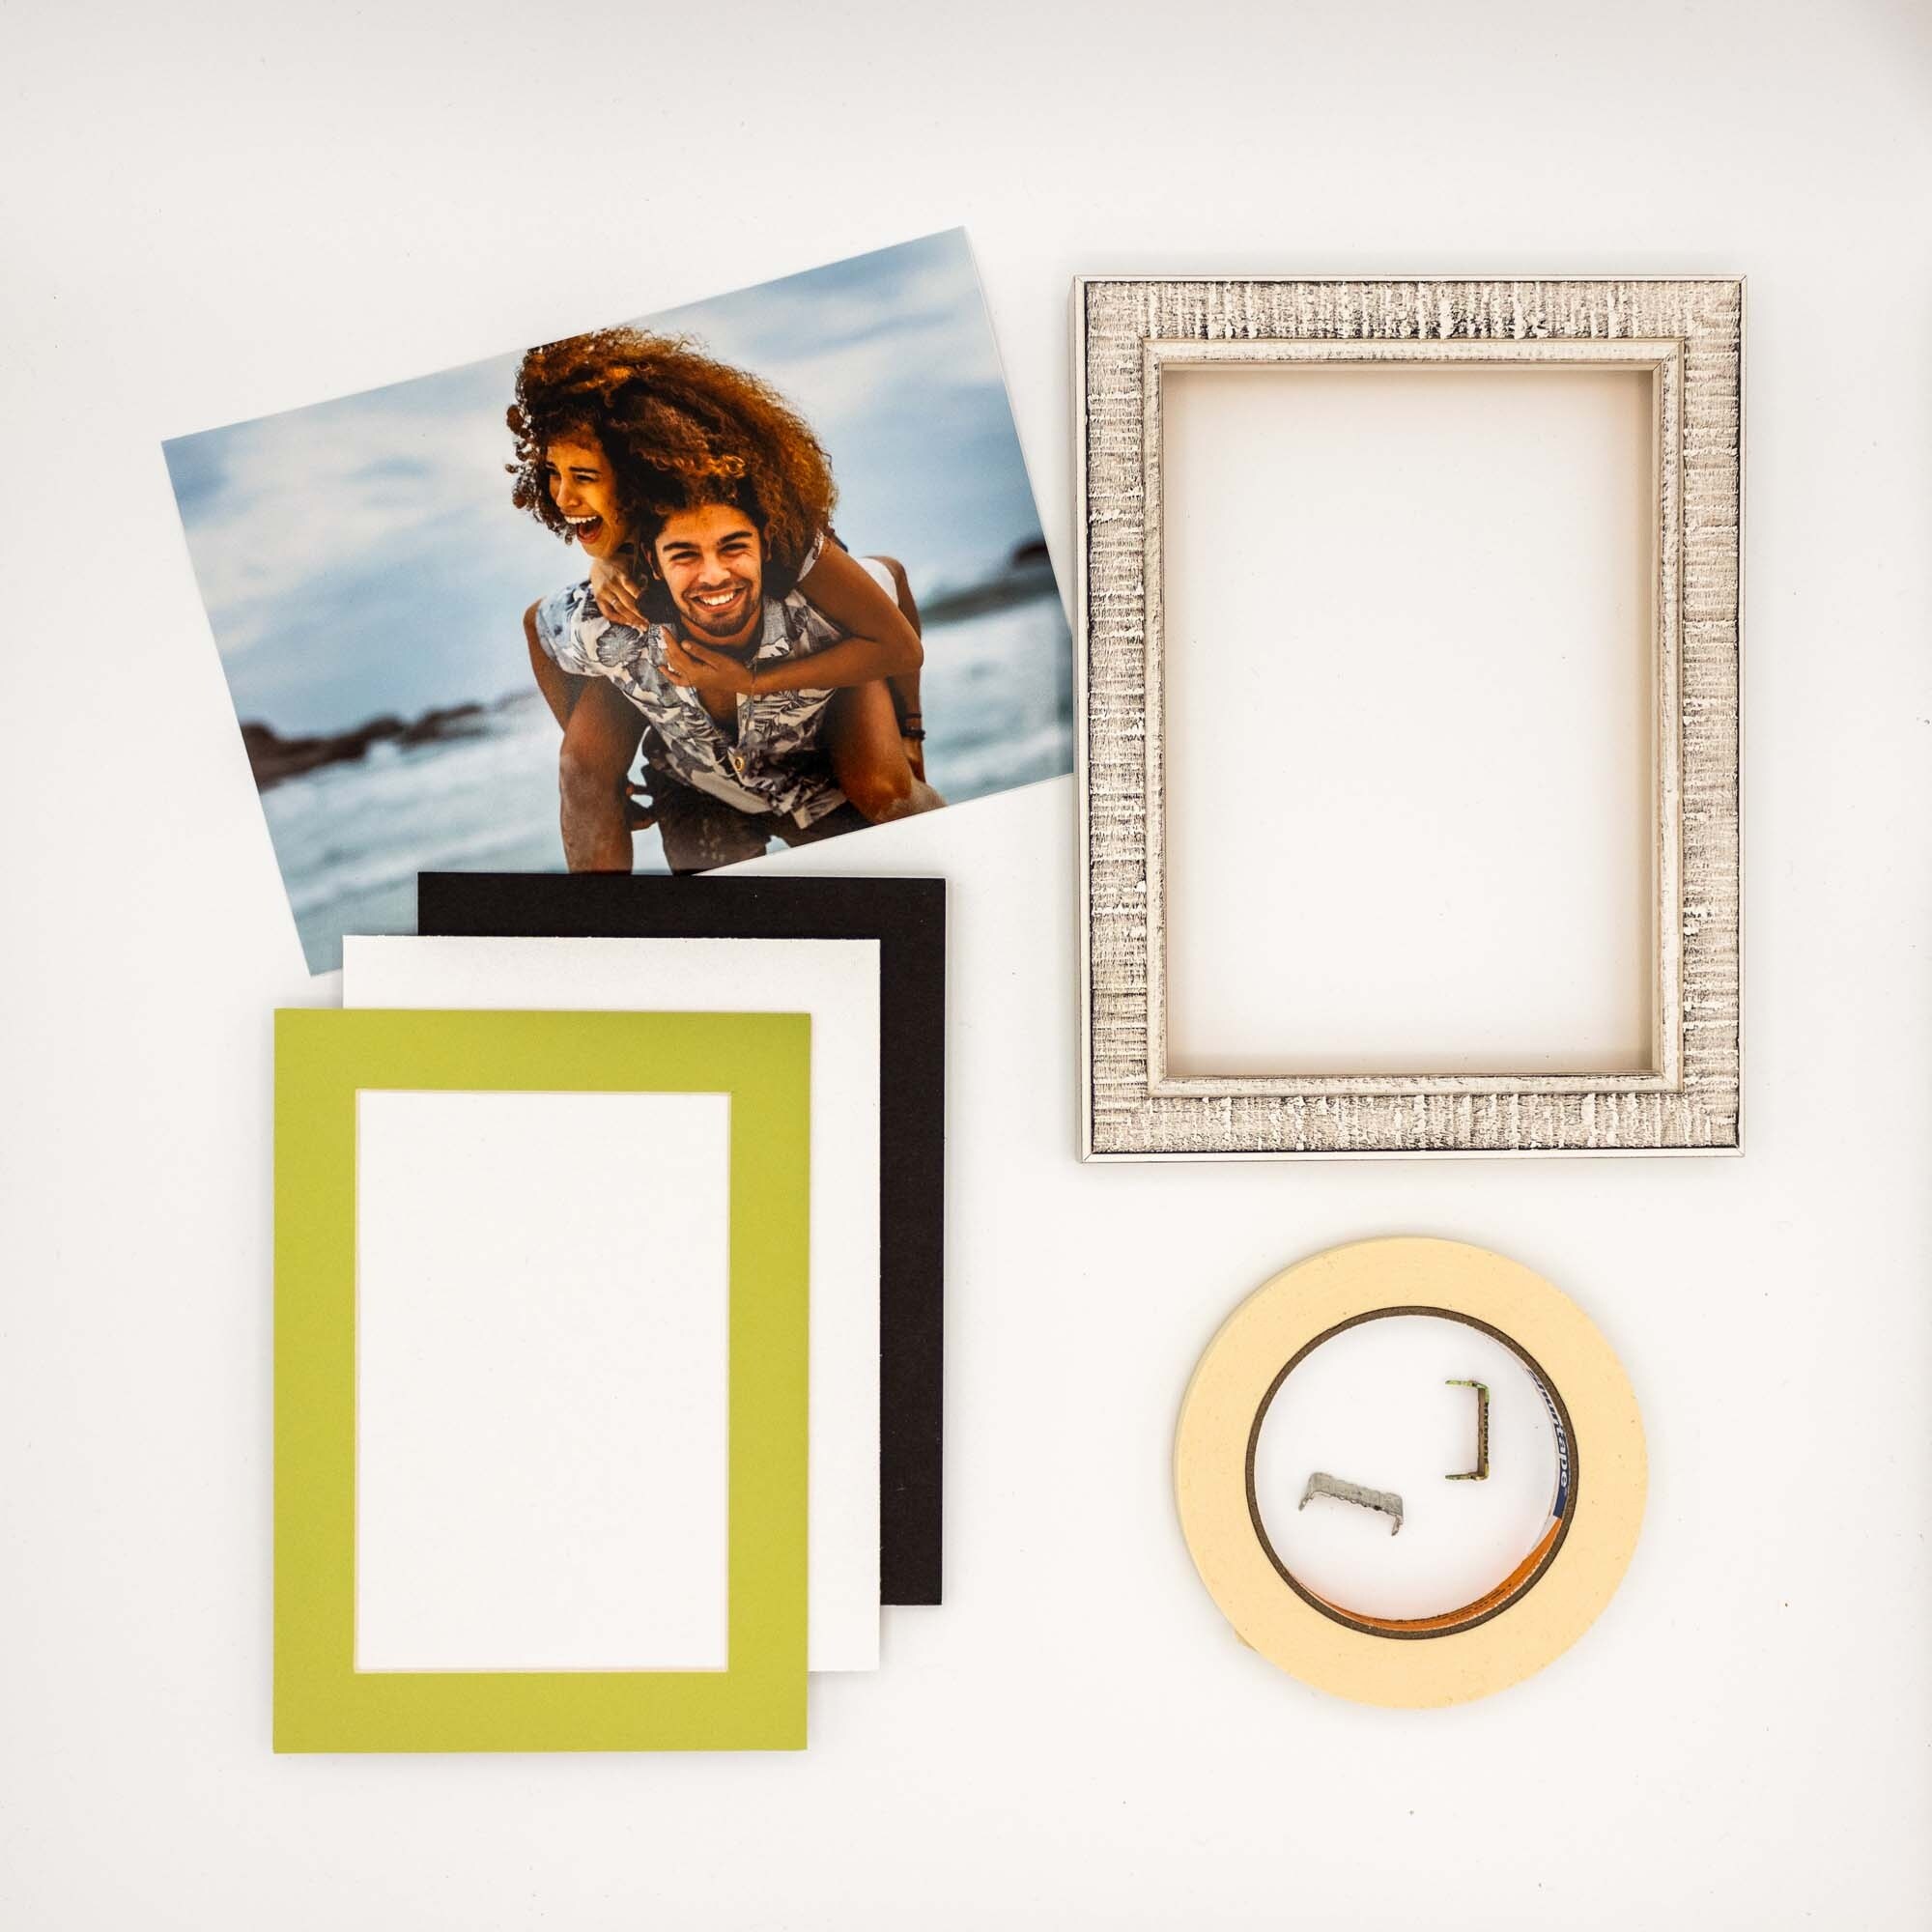 5x7 Mat for 8x10 Frame - Precut Mat Board Acid-Free Pistachio Green 5x7  Photo Matte Made to Fit a 8x10 Picture Frame - On Sale - Bed Bath & Beyond  - 38872494